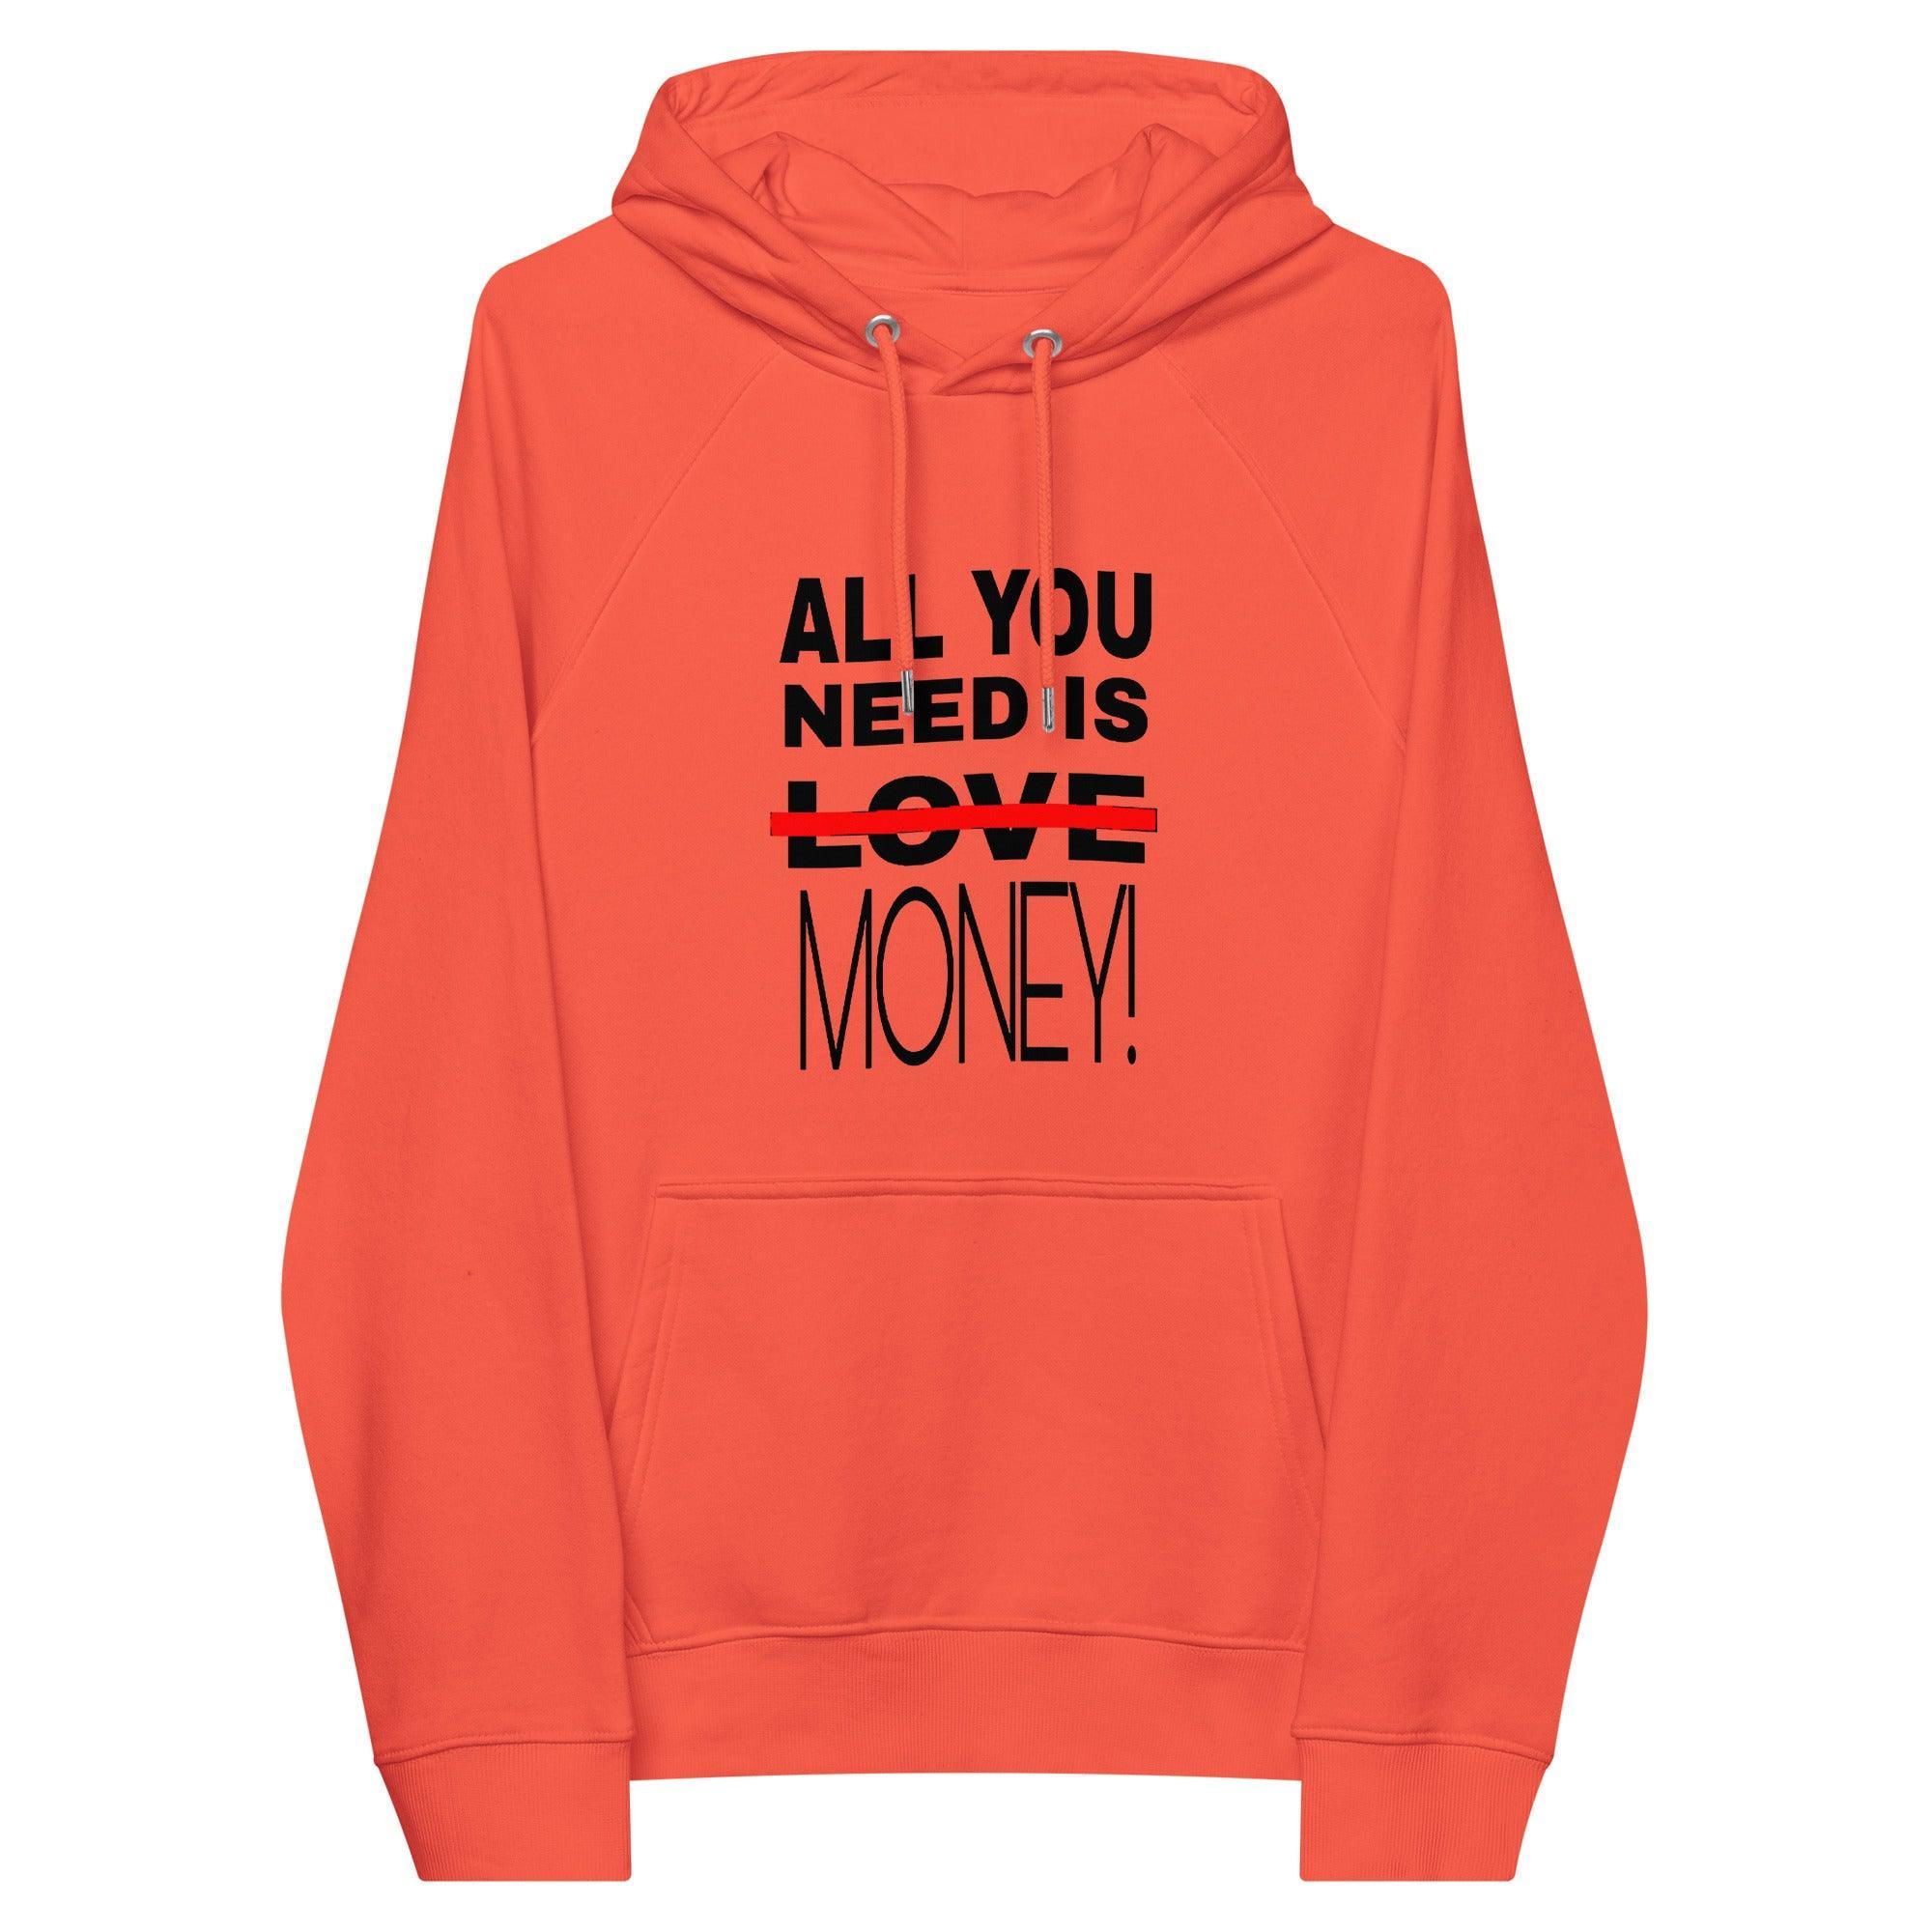 All You Need Is Money Pullover Hoodie - InvestmenTees